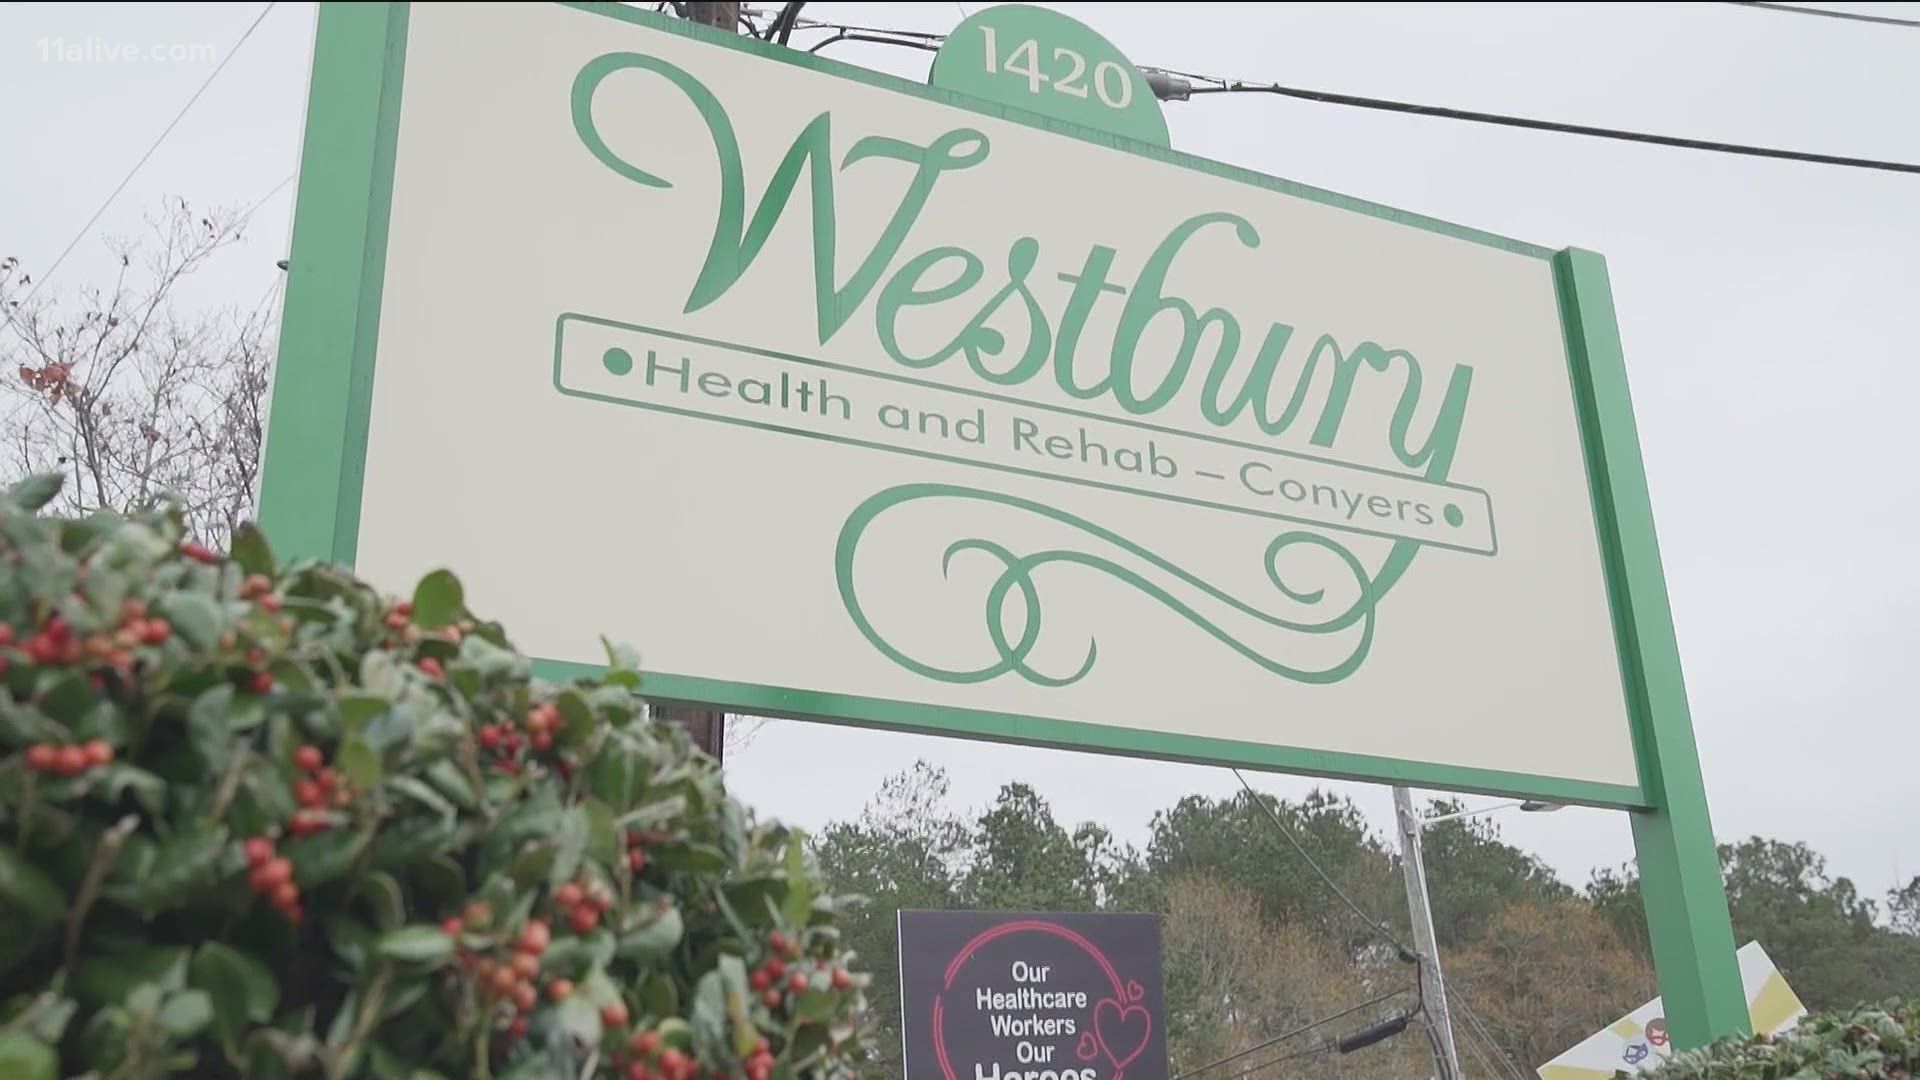 A state health inspector issued warnings that a Conyers nursing home wasn't doing enough to protect their residents from COVID-19, before the outbreak.